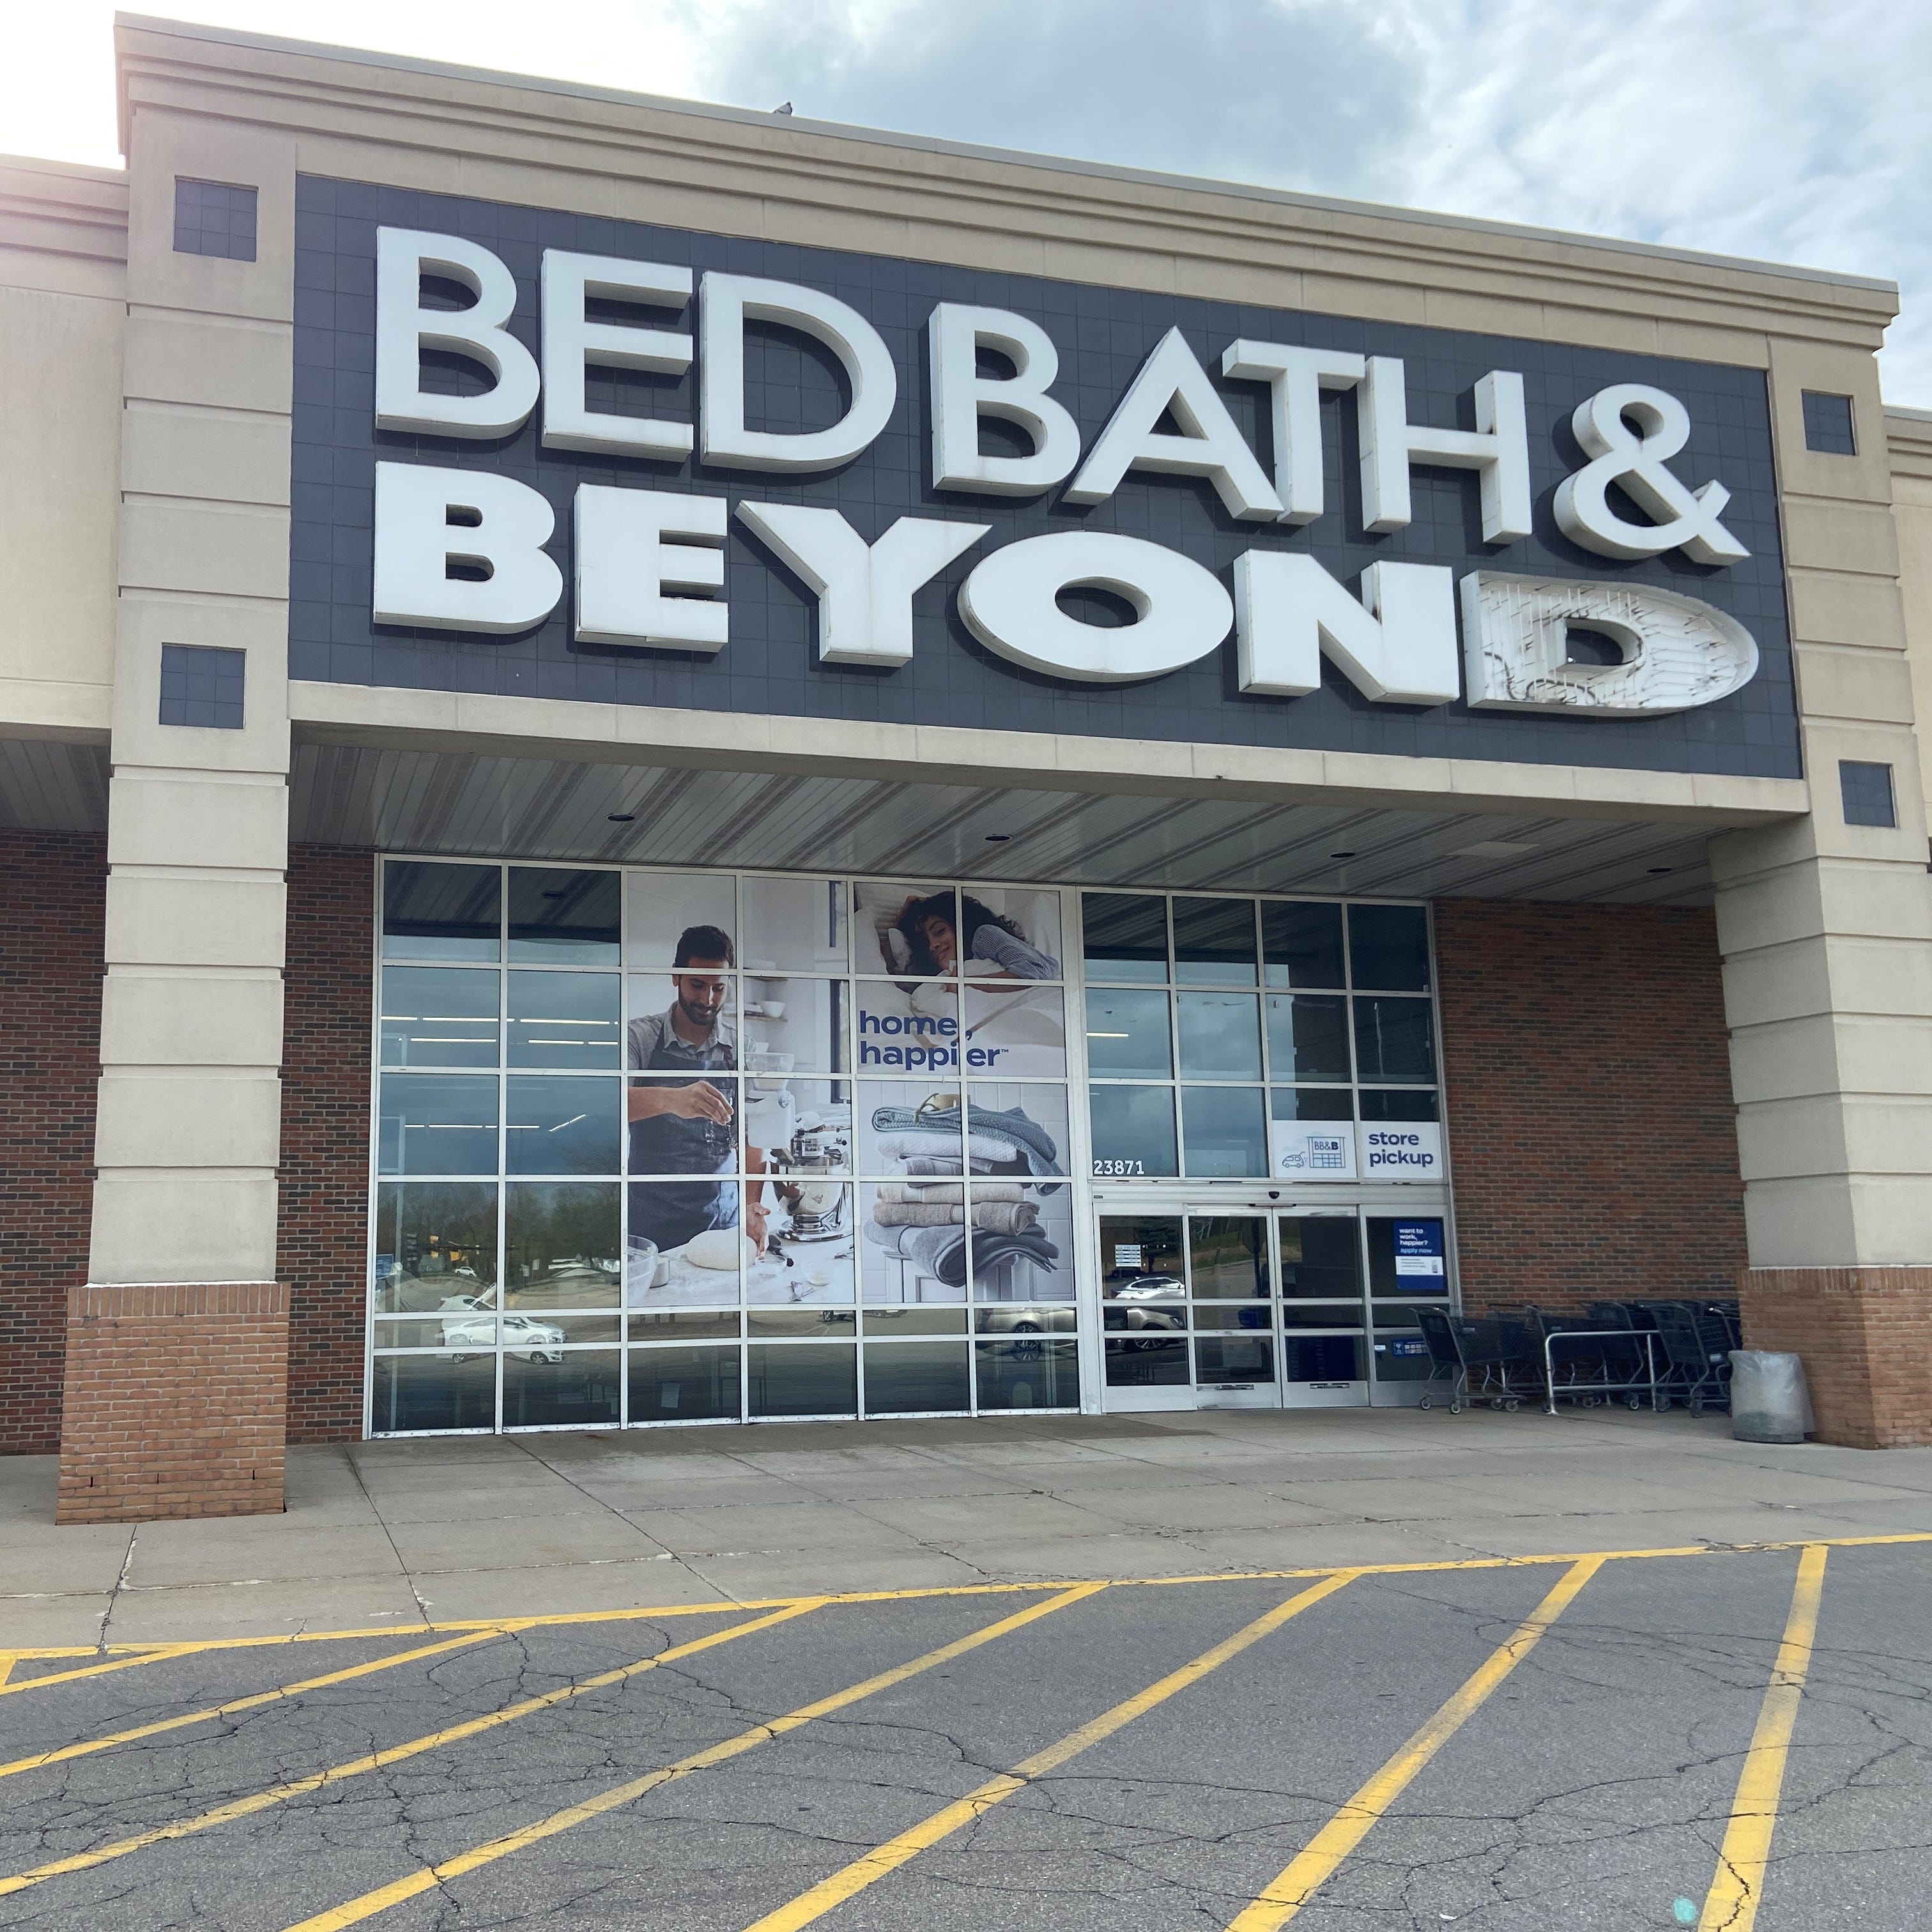 Bed Bath & Beyond store in Taylor, Michigan.